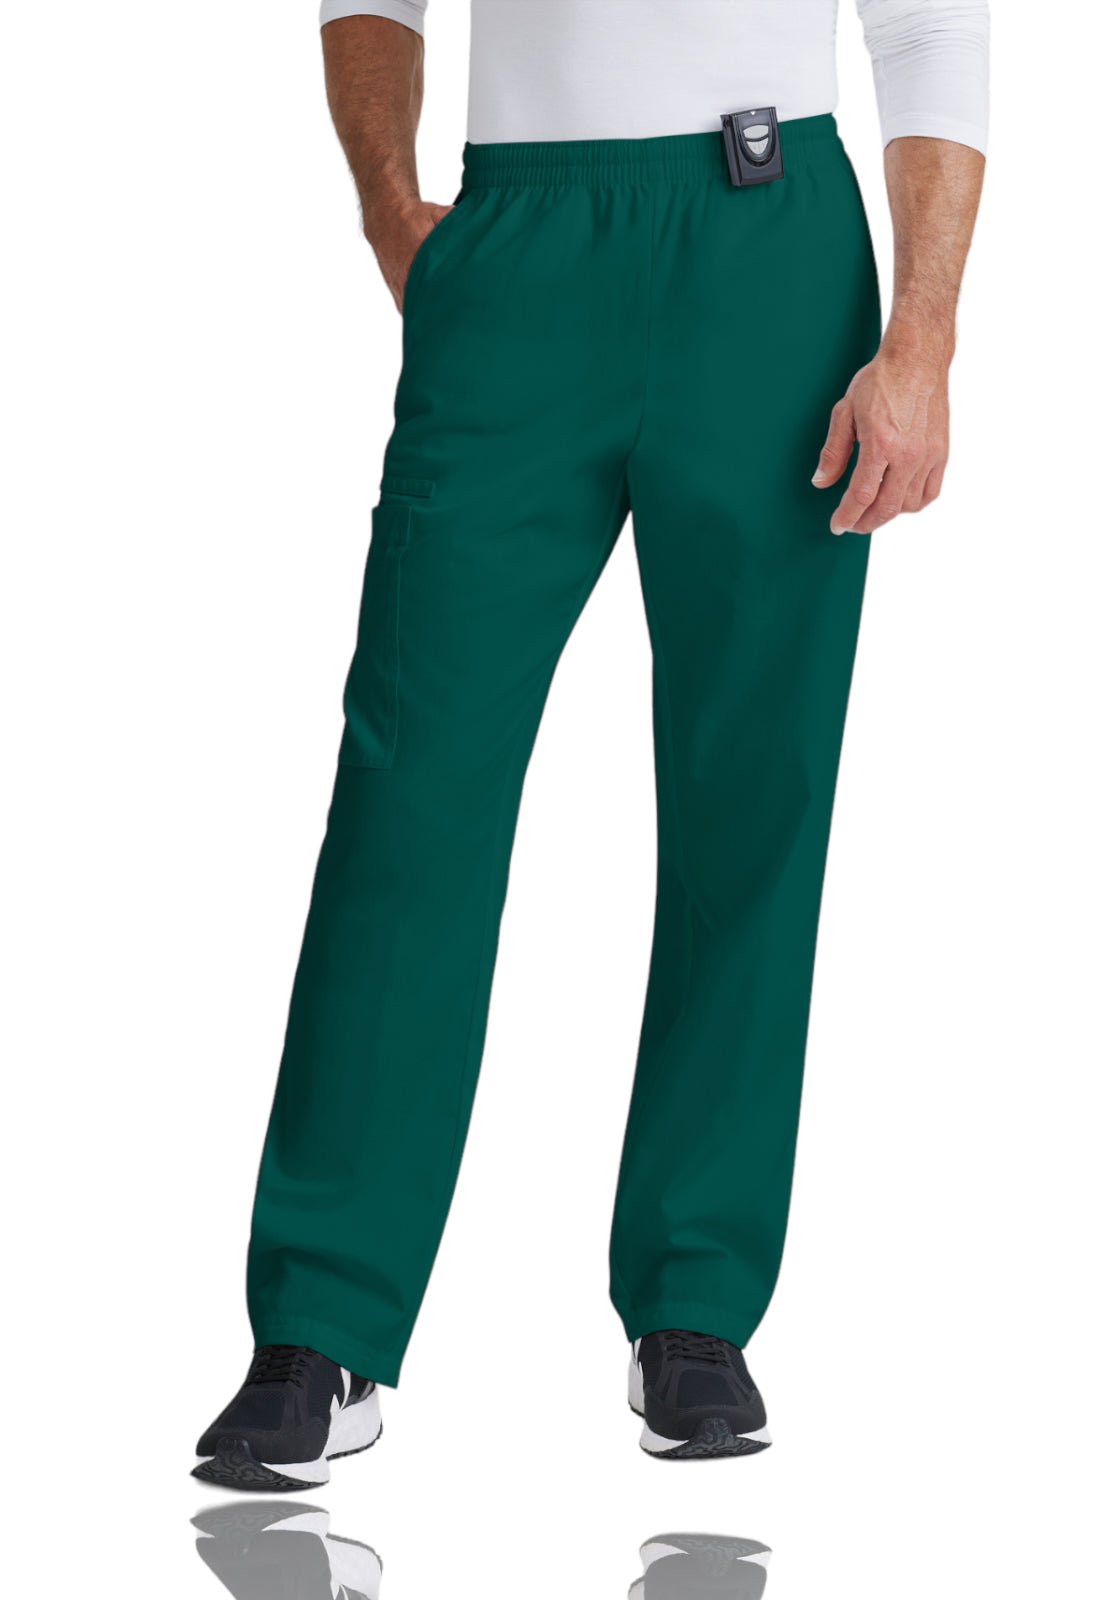 Unisex Tunneled Drawcord Pant - BE005 - Hunter Green